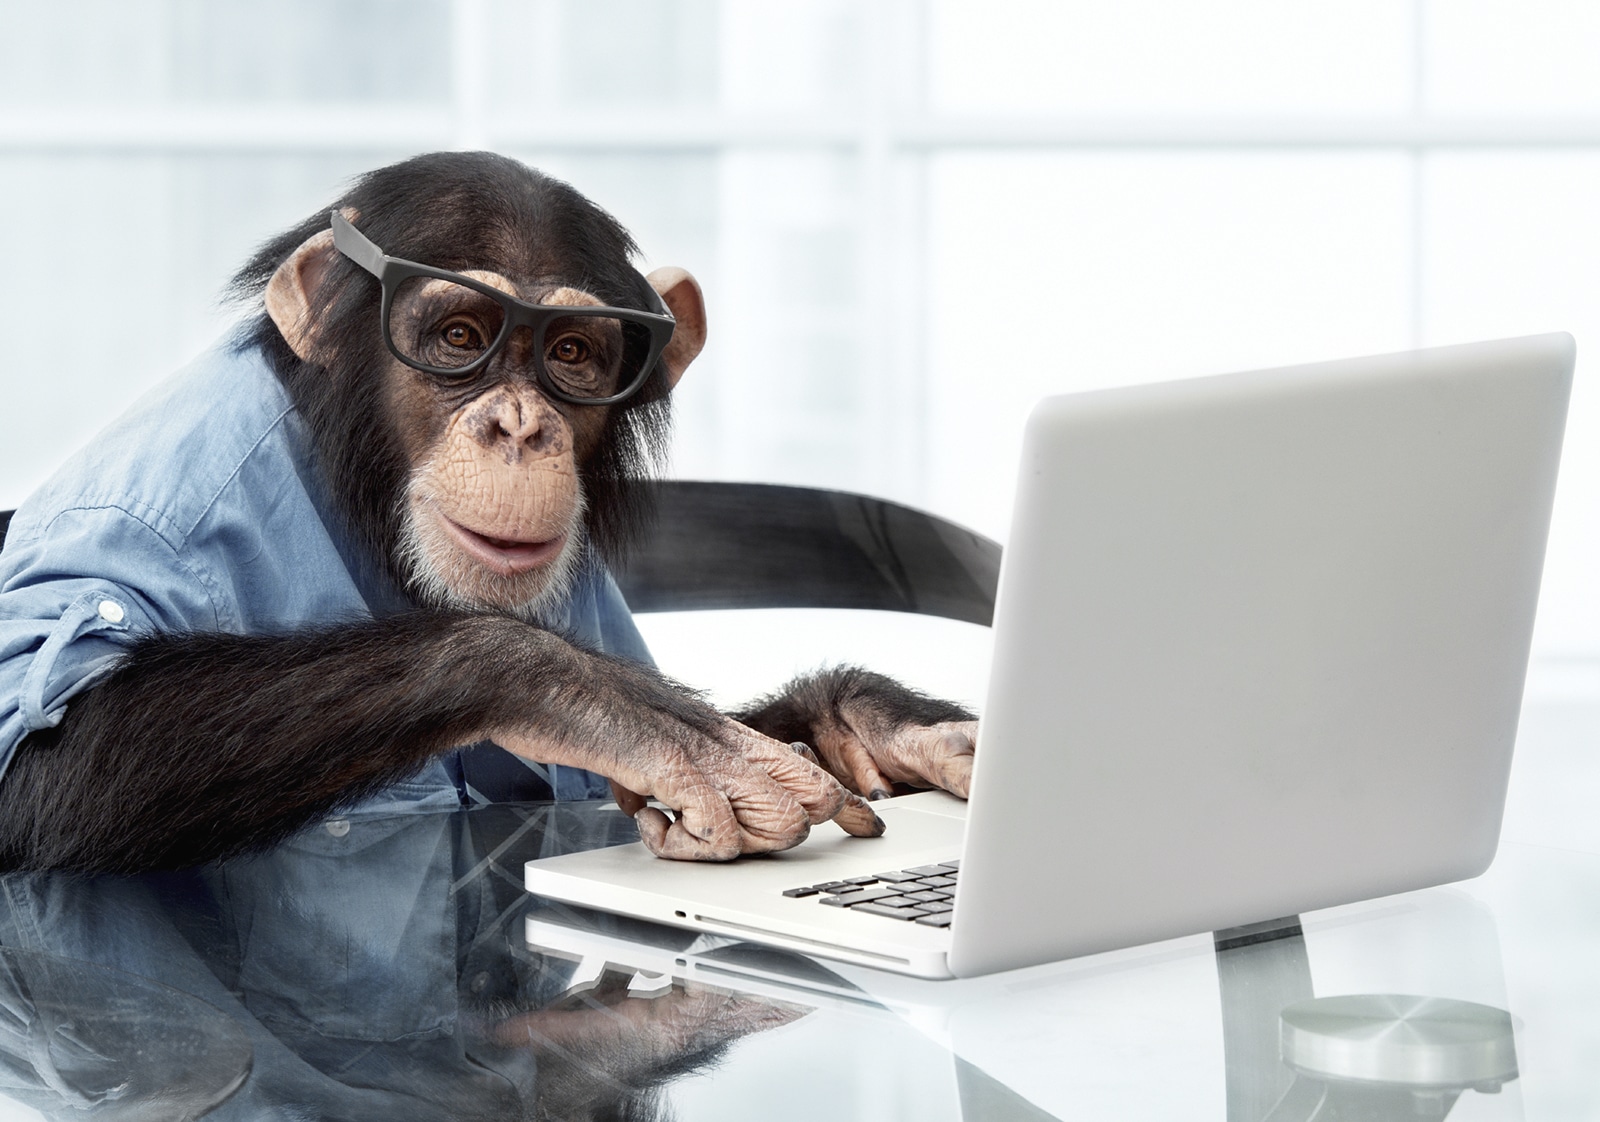 Photo of a Monkey using a laptop, being a copycat of its human owner.